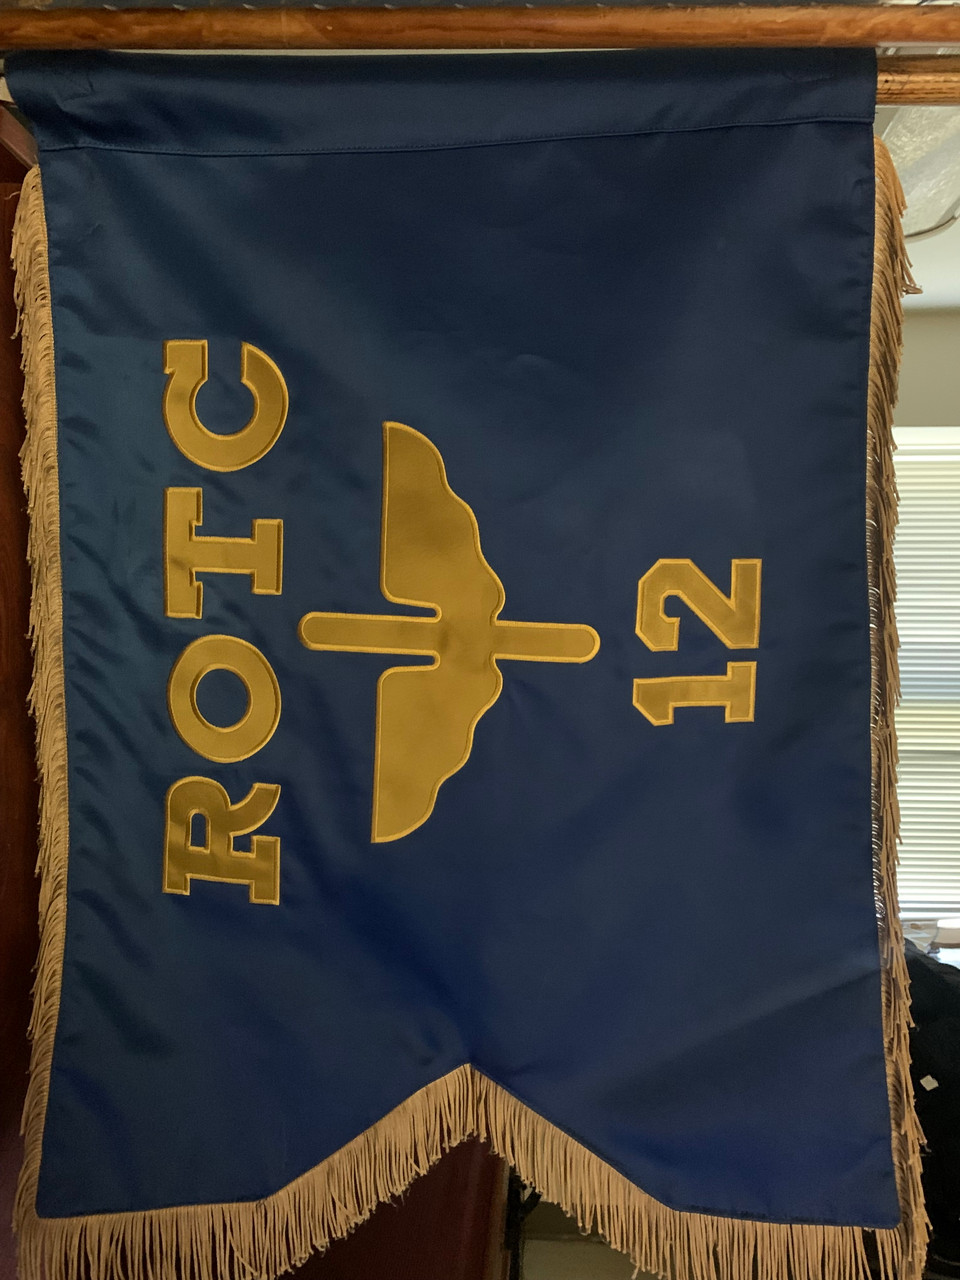 Custom Applique Guidon 20" x 27" With Pole Hem, Fringe and Swallow Tail "ROTC ABOVE EMBLEM 12 BELOW"